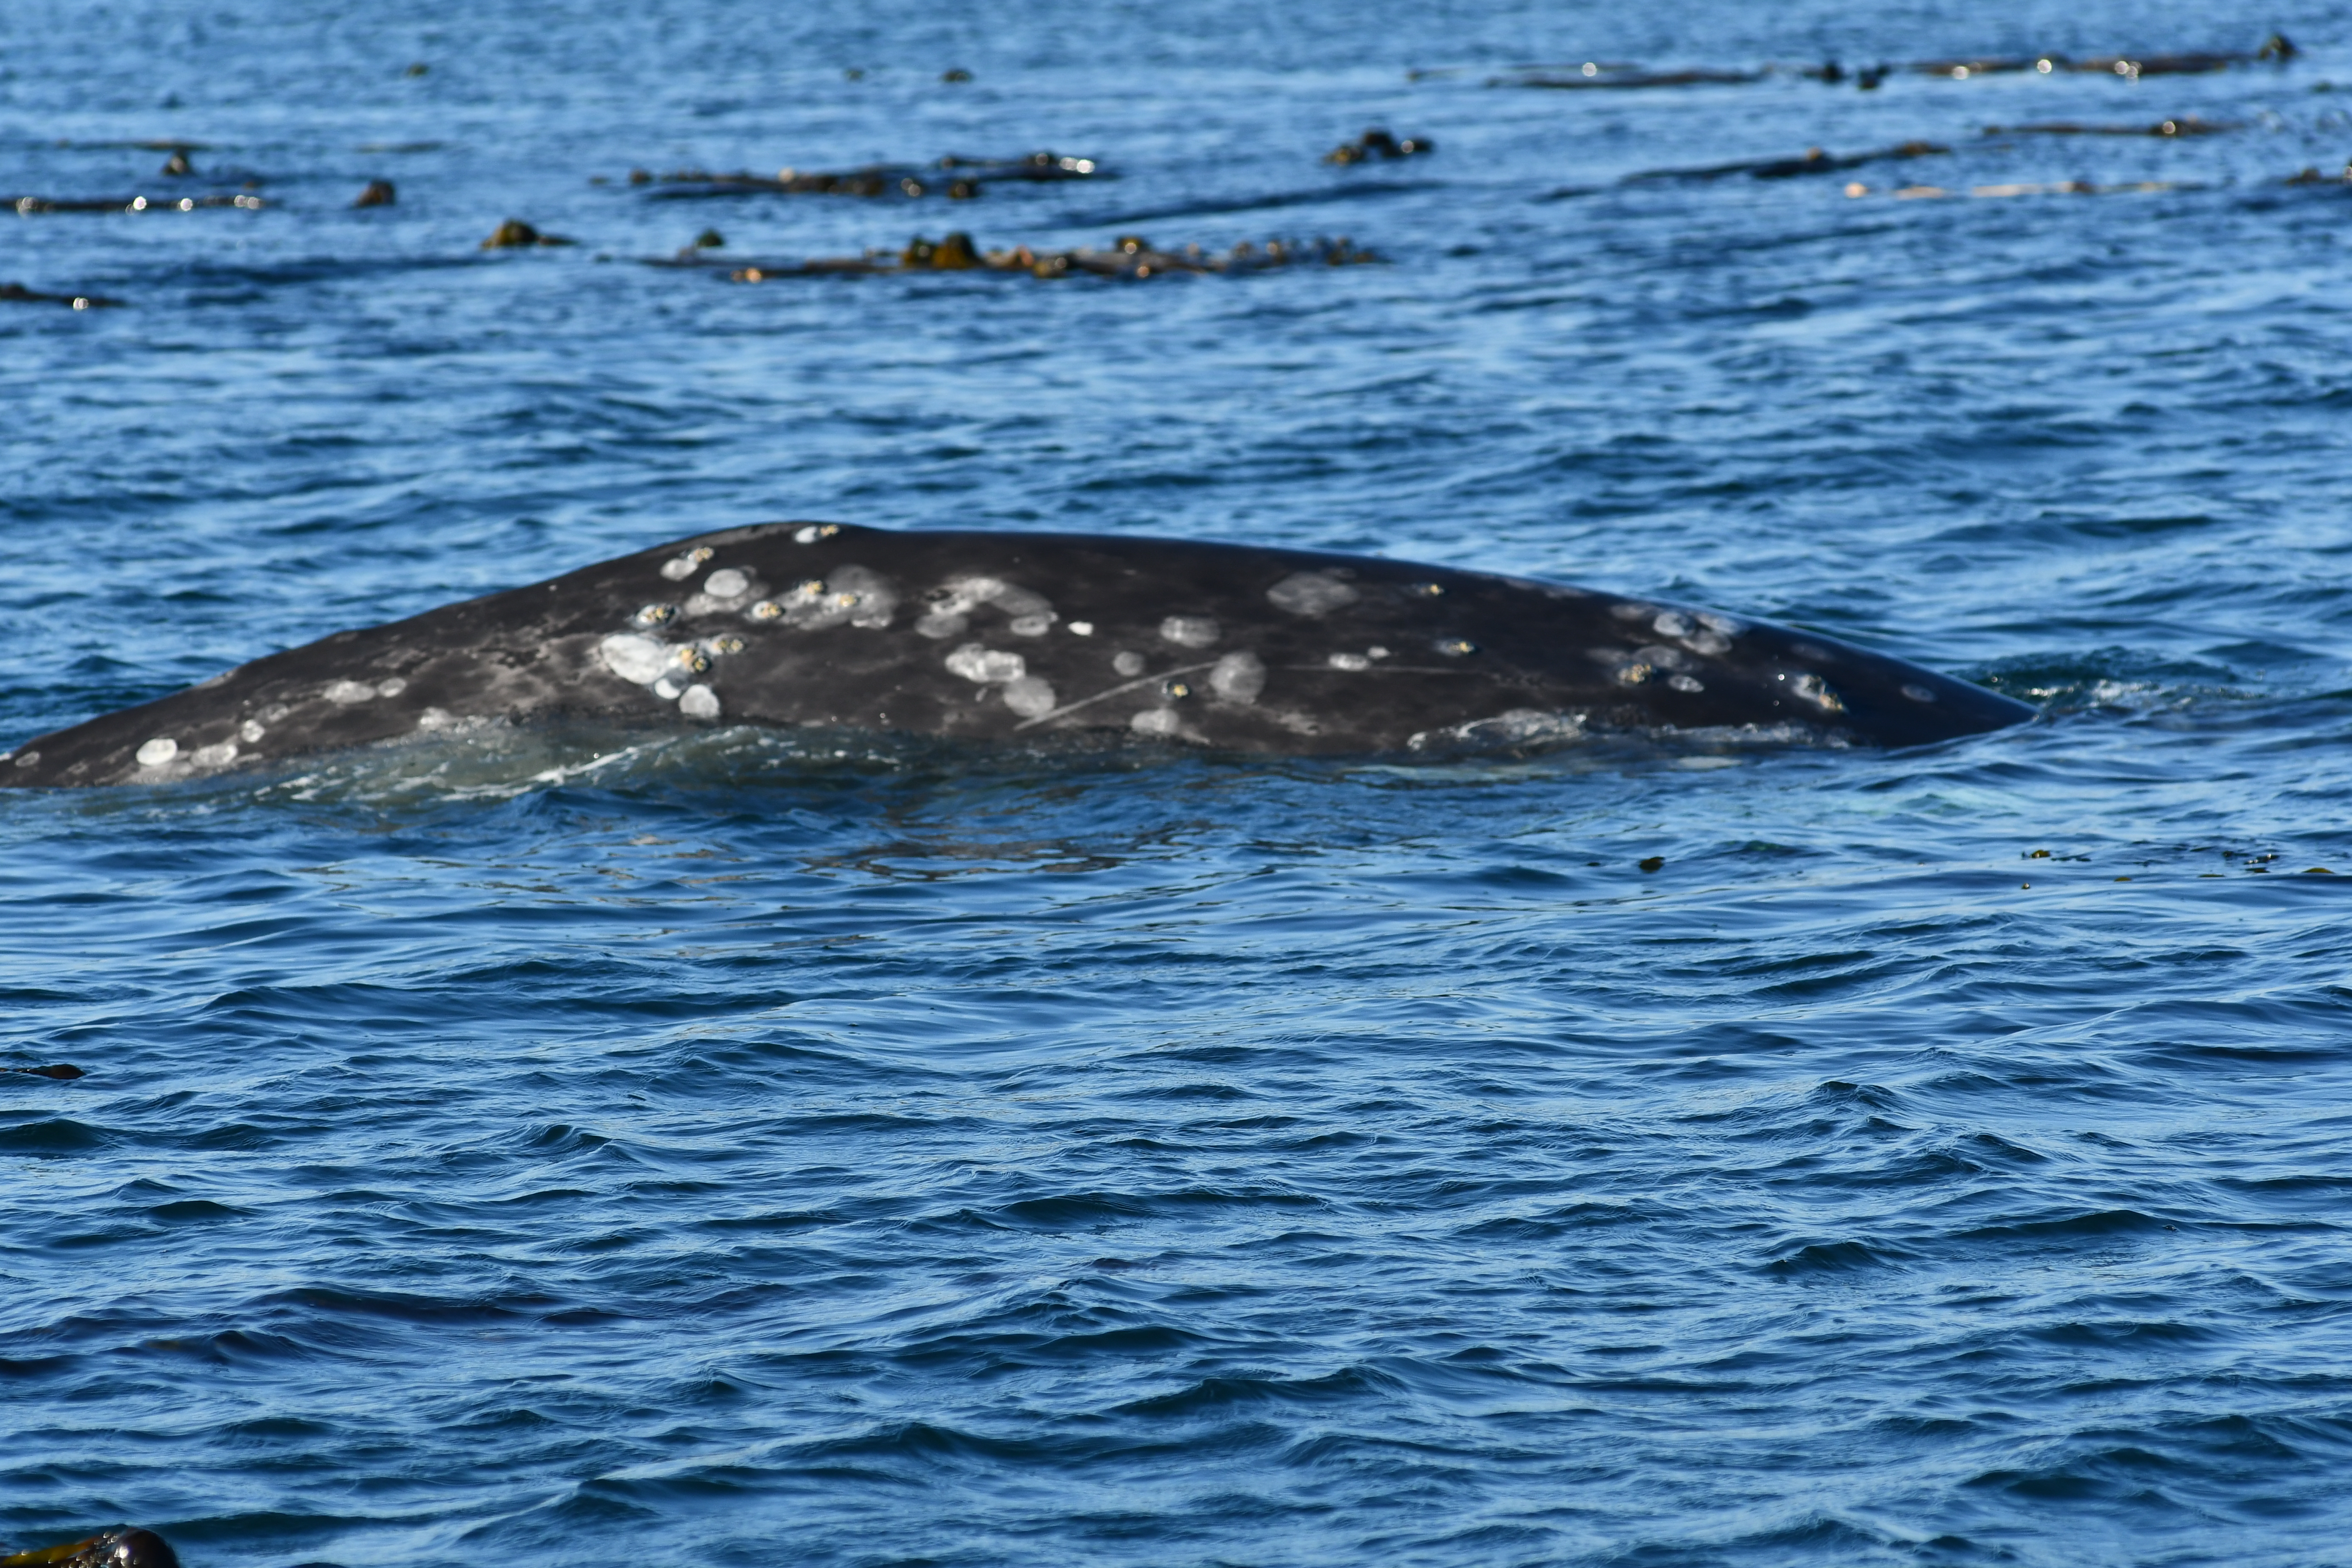 Image: International Collaboration To Monitor And Respond To Tagged Gray Whale